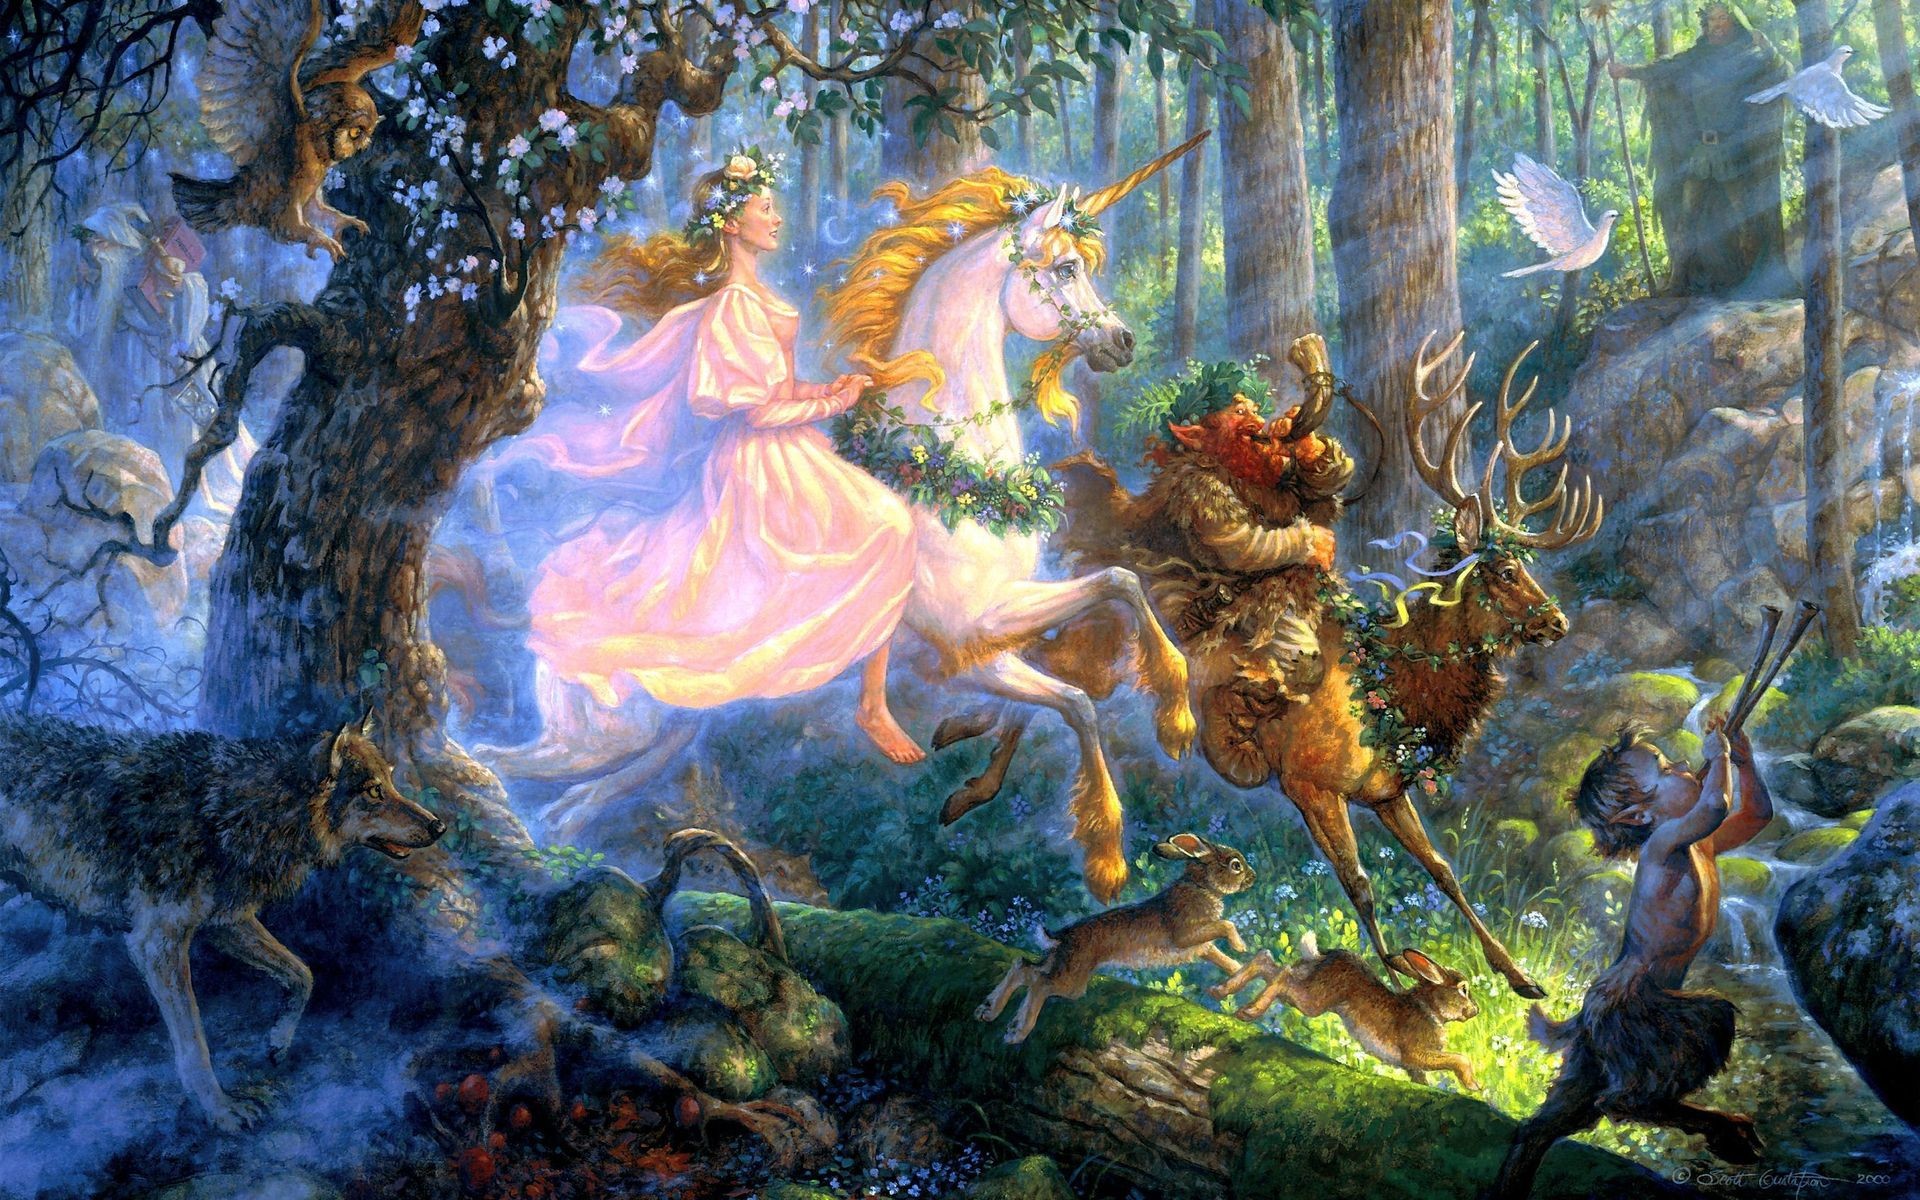 1920x1200 fantasy, females, background,scottgustafson view, women, gustafson,  abstract stock images, unicorn, magical, trees, paintings, forest,  artistic, ...